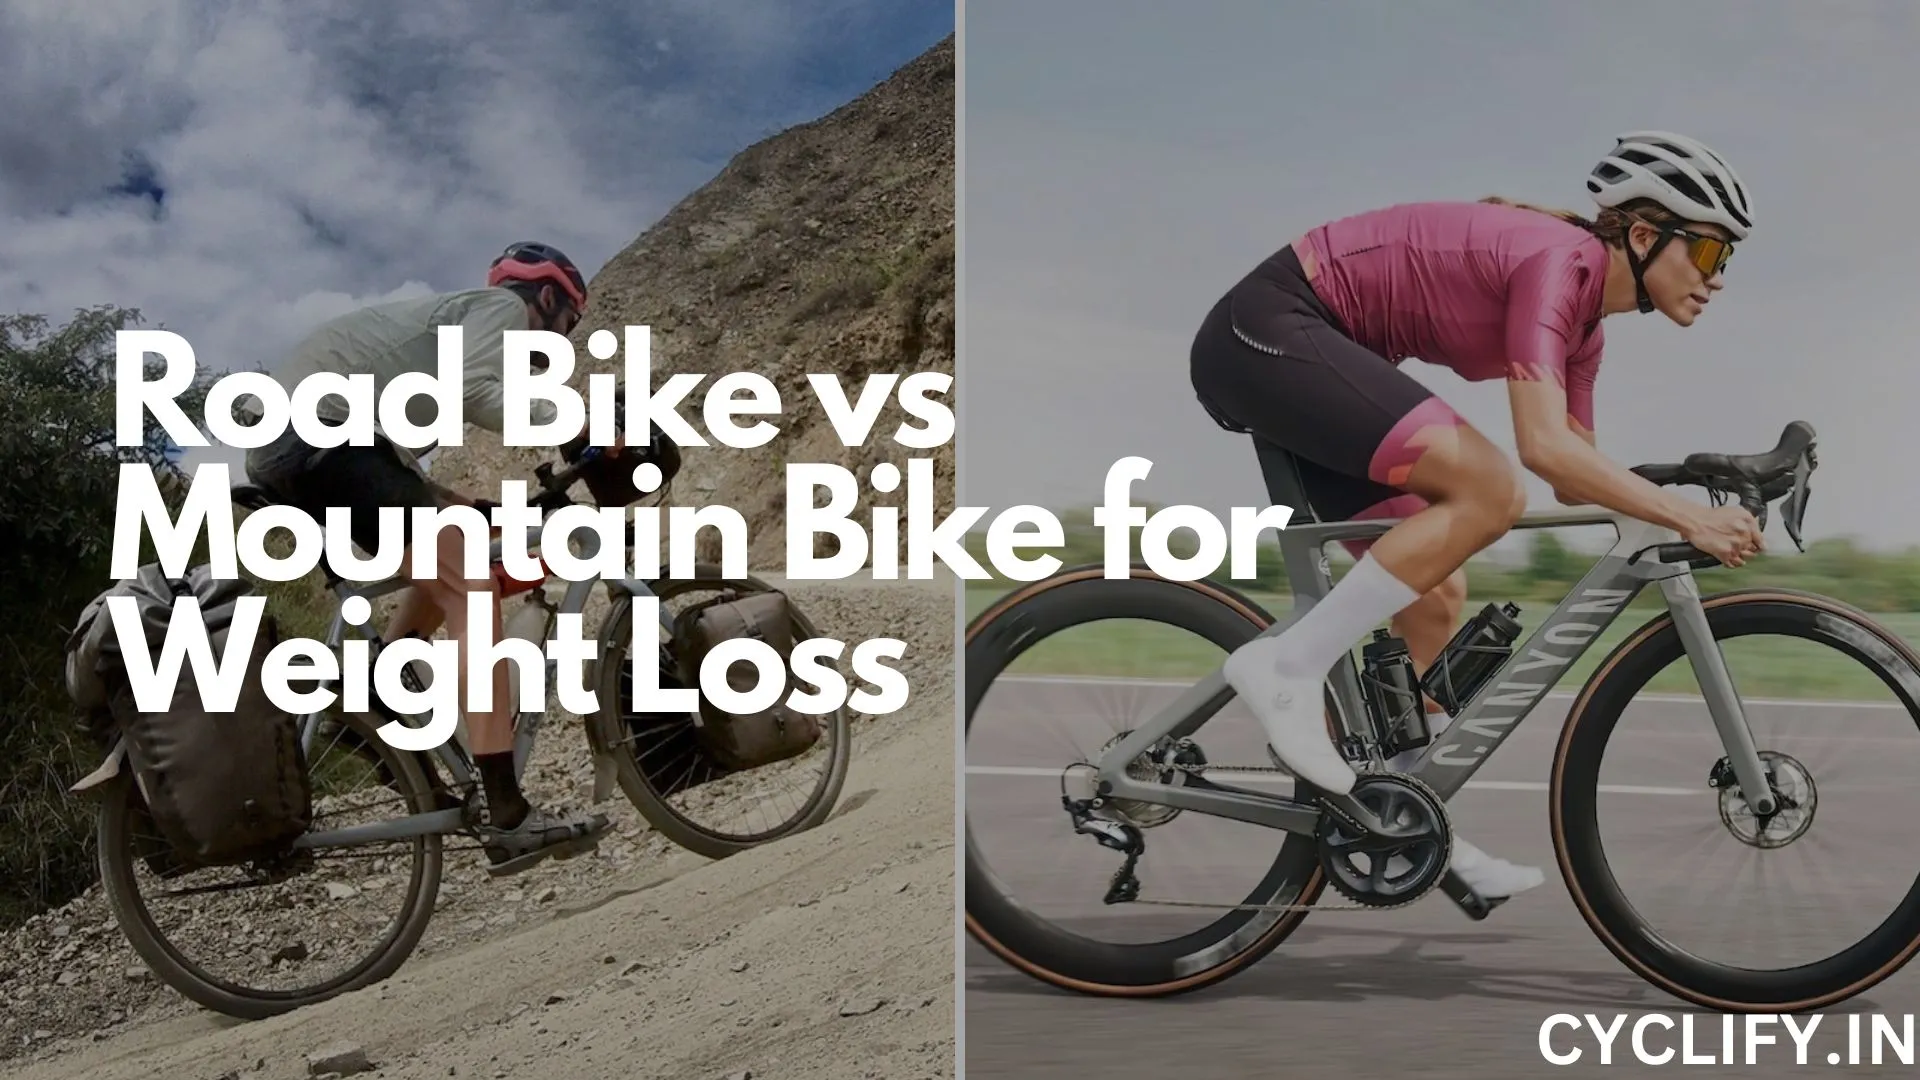 Road Bike vs Mountain Bike for Weight Loss - A comparison between road and mountain bike.